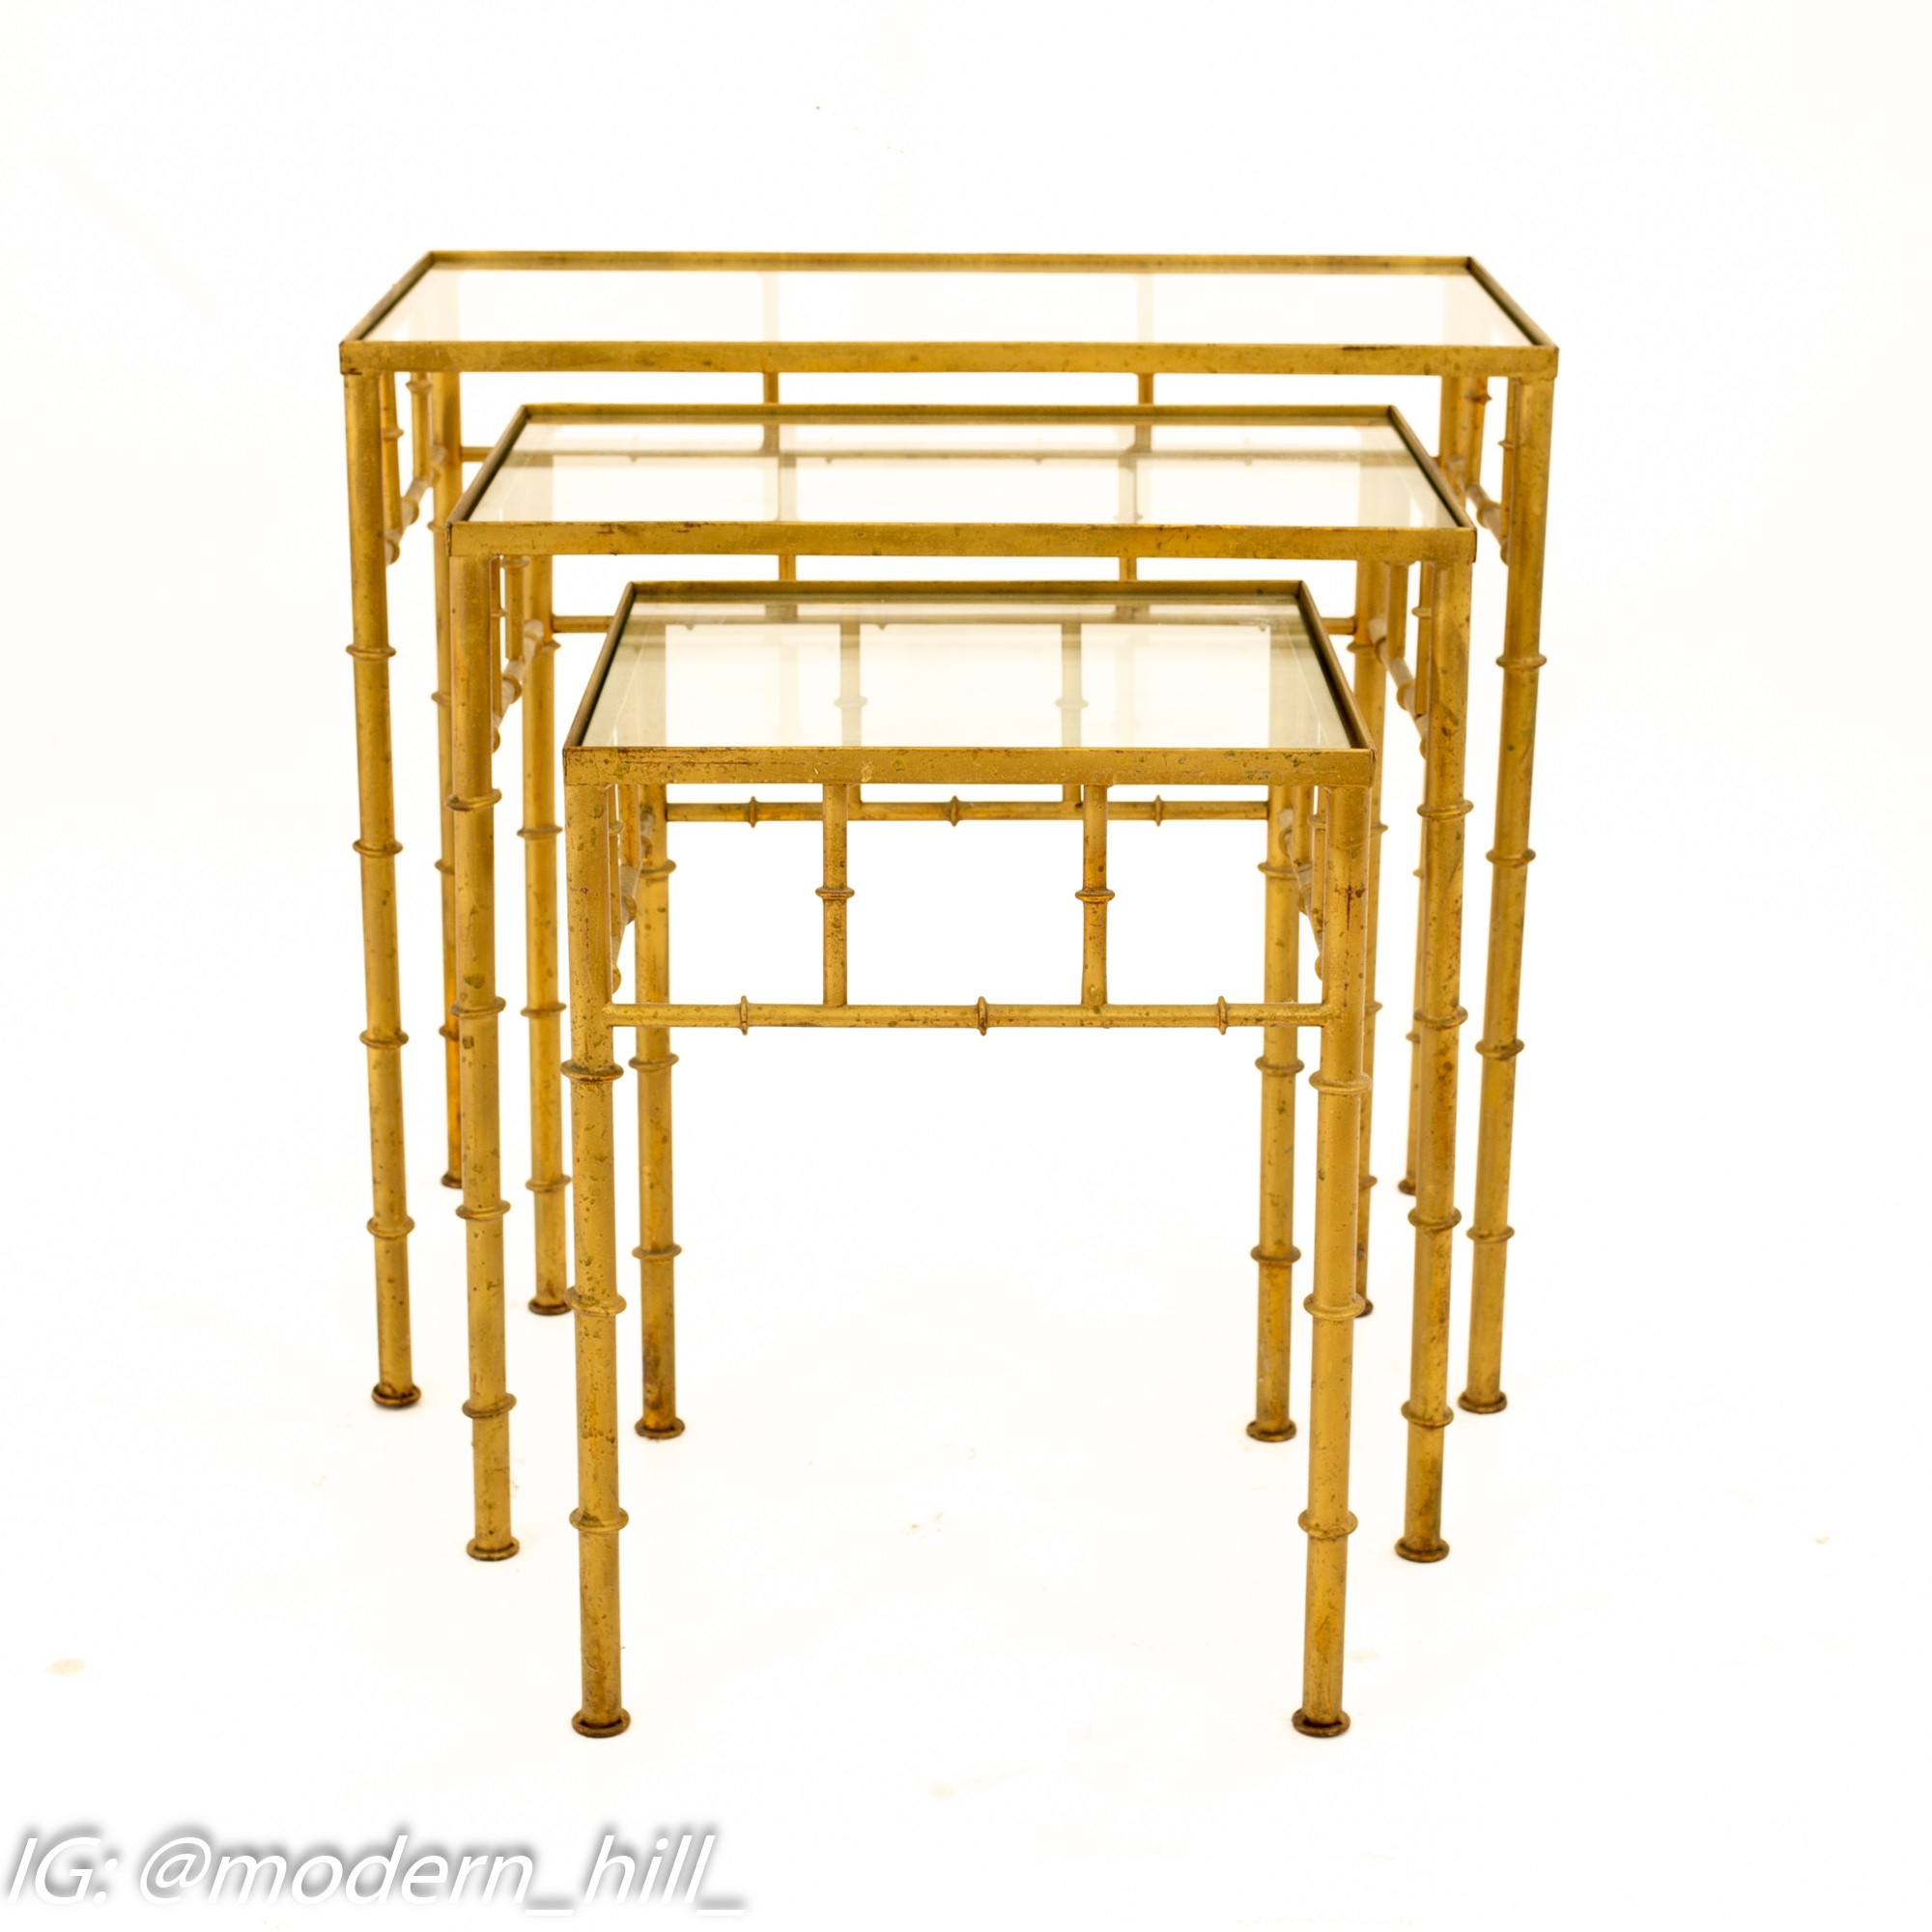 SOLD Nesting tables are timeless and this set is fabulous! ✨This vintage  gold metal faux bamboo trio with glass will add a little class